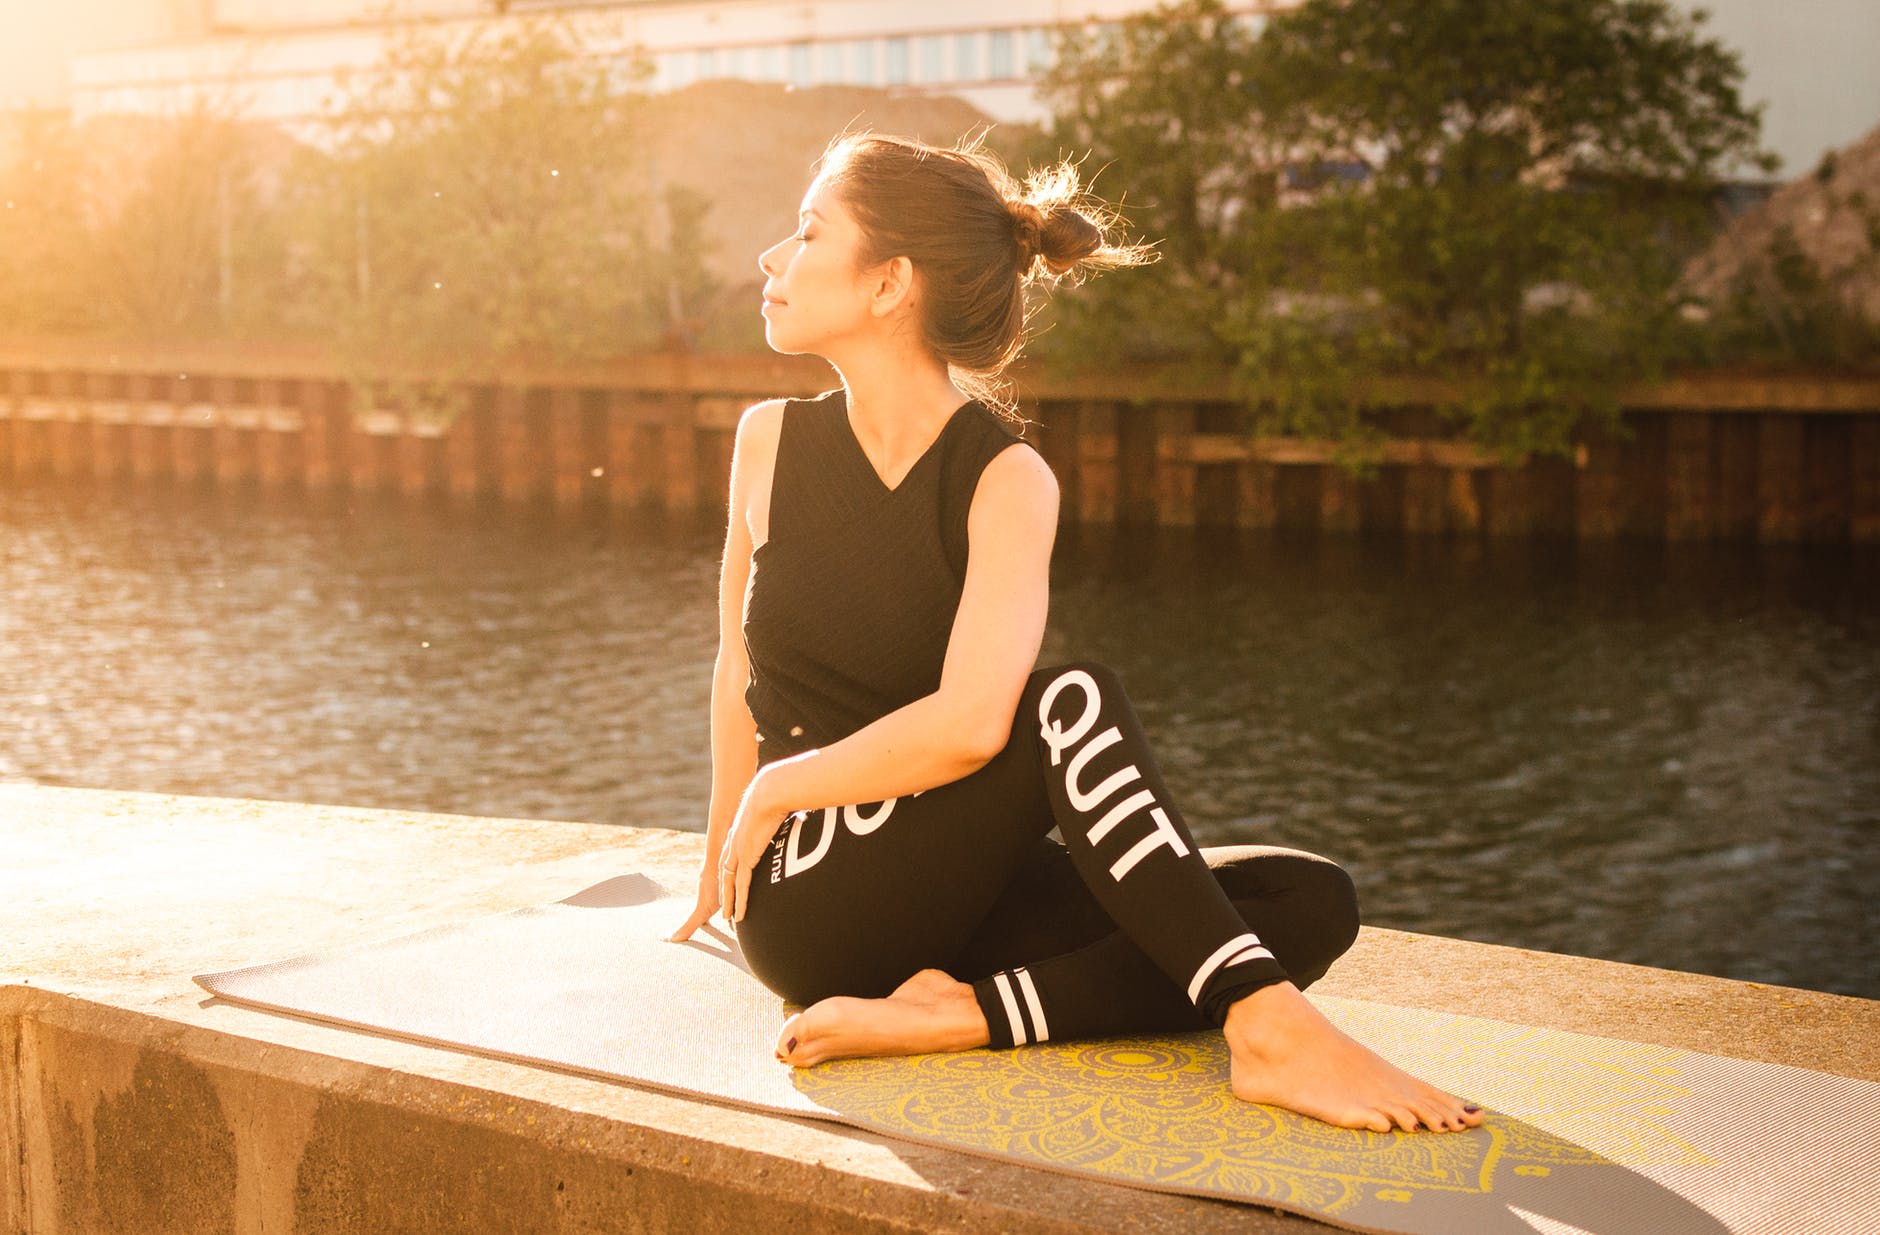 woman wearing black fitness outfit performs yoga near body of water